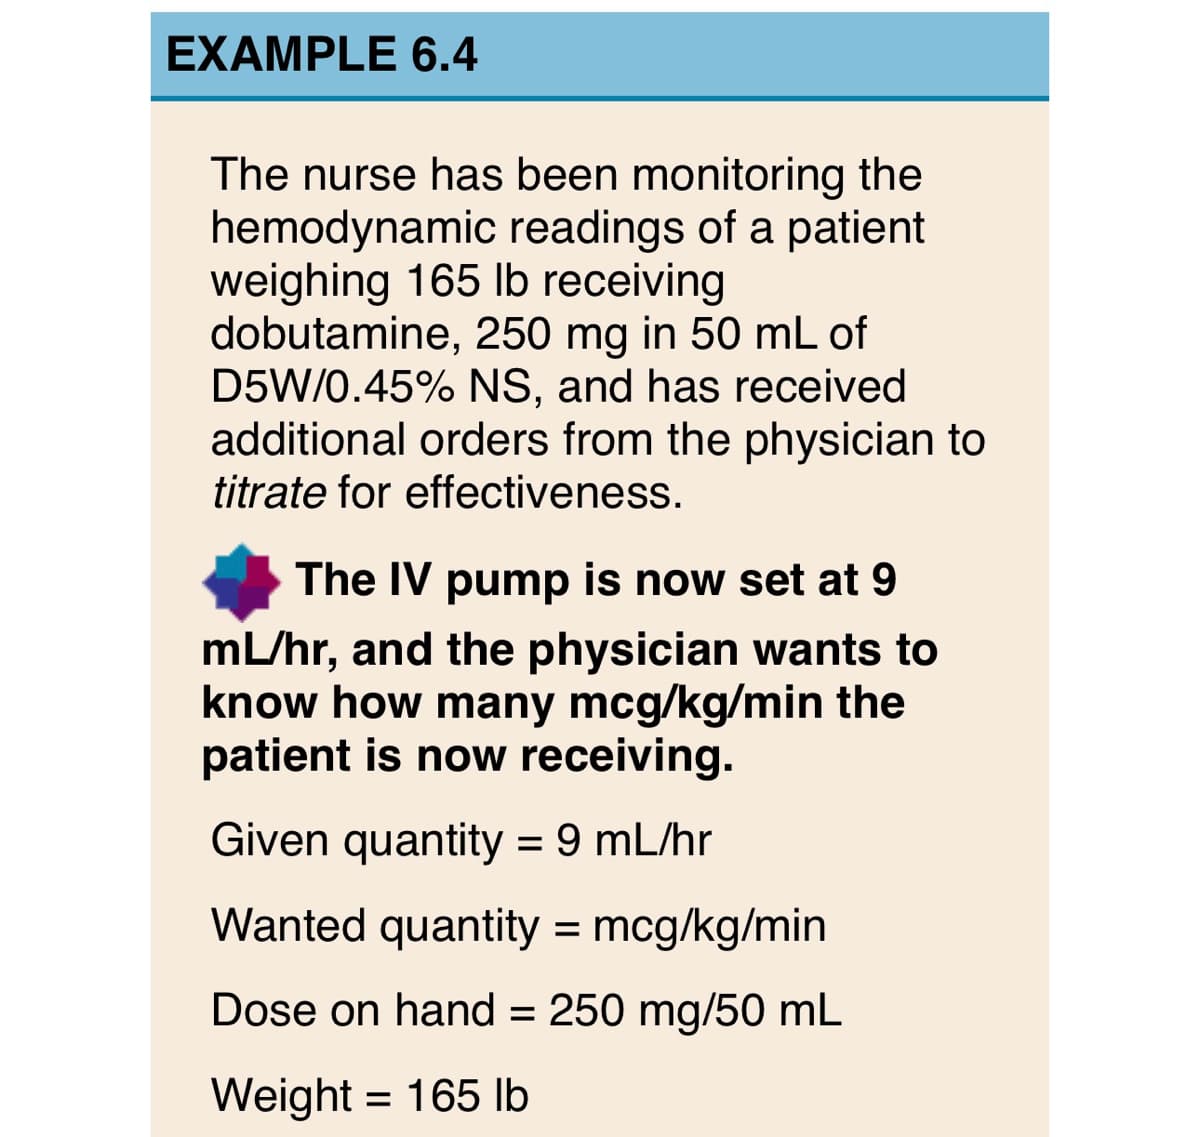 EXAMPLE 6.4
The nurse has been monitoring the
hemodynamic readings of a patient
weighing 165 lb receiving
dobutamine, 250 mg in 50 mL of
D5W/0.45% NS, and has received
additional orders from the physician to
titrate for effectiveness.
The IV pump is now set at 9
mL/hr, and the physician wants to
know how many mcg/kg/min the
patient is now receiving.
Given quantity = 9 mL/hr
Wanted quantity = mcg/kg/min
Dose on hand = 250 mg/50 mL
Weight 165 lb
=